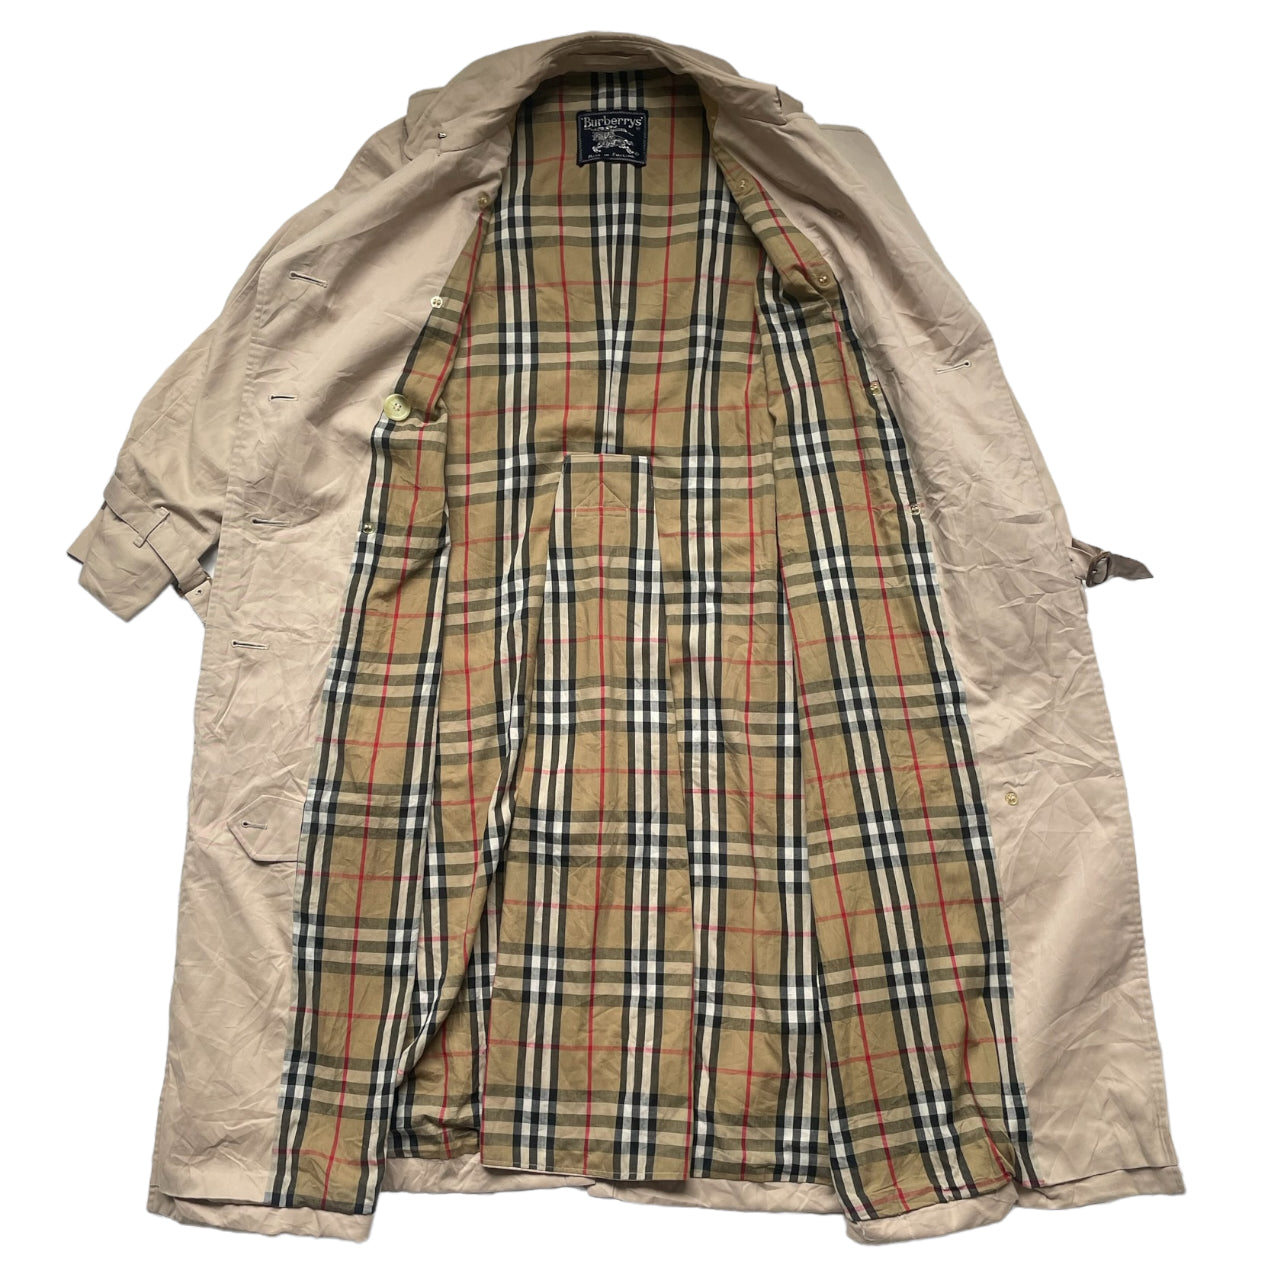 Vintage Burberry Trench coat Lined 90s Retro Size M Beige A_50